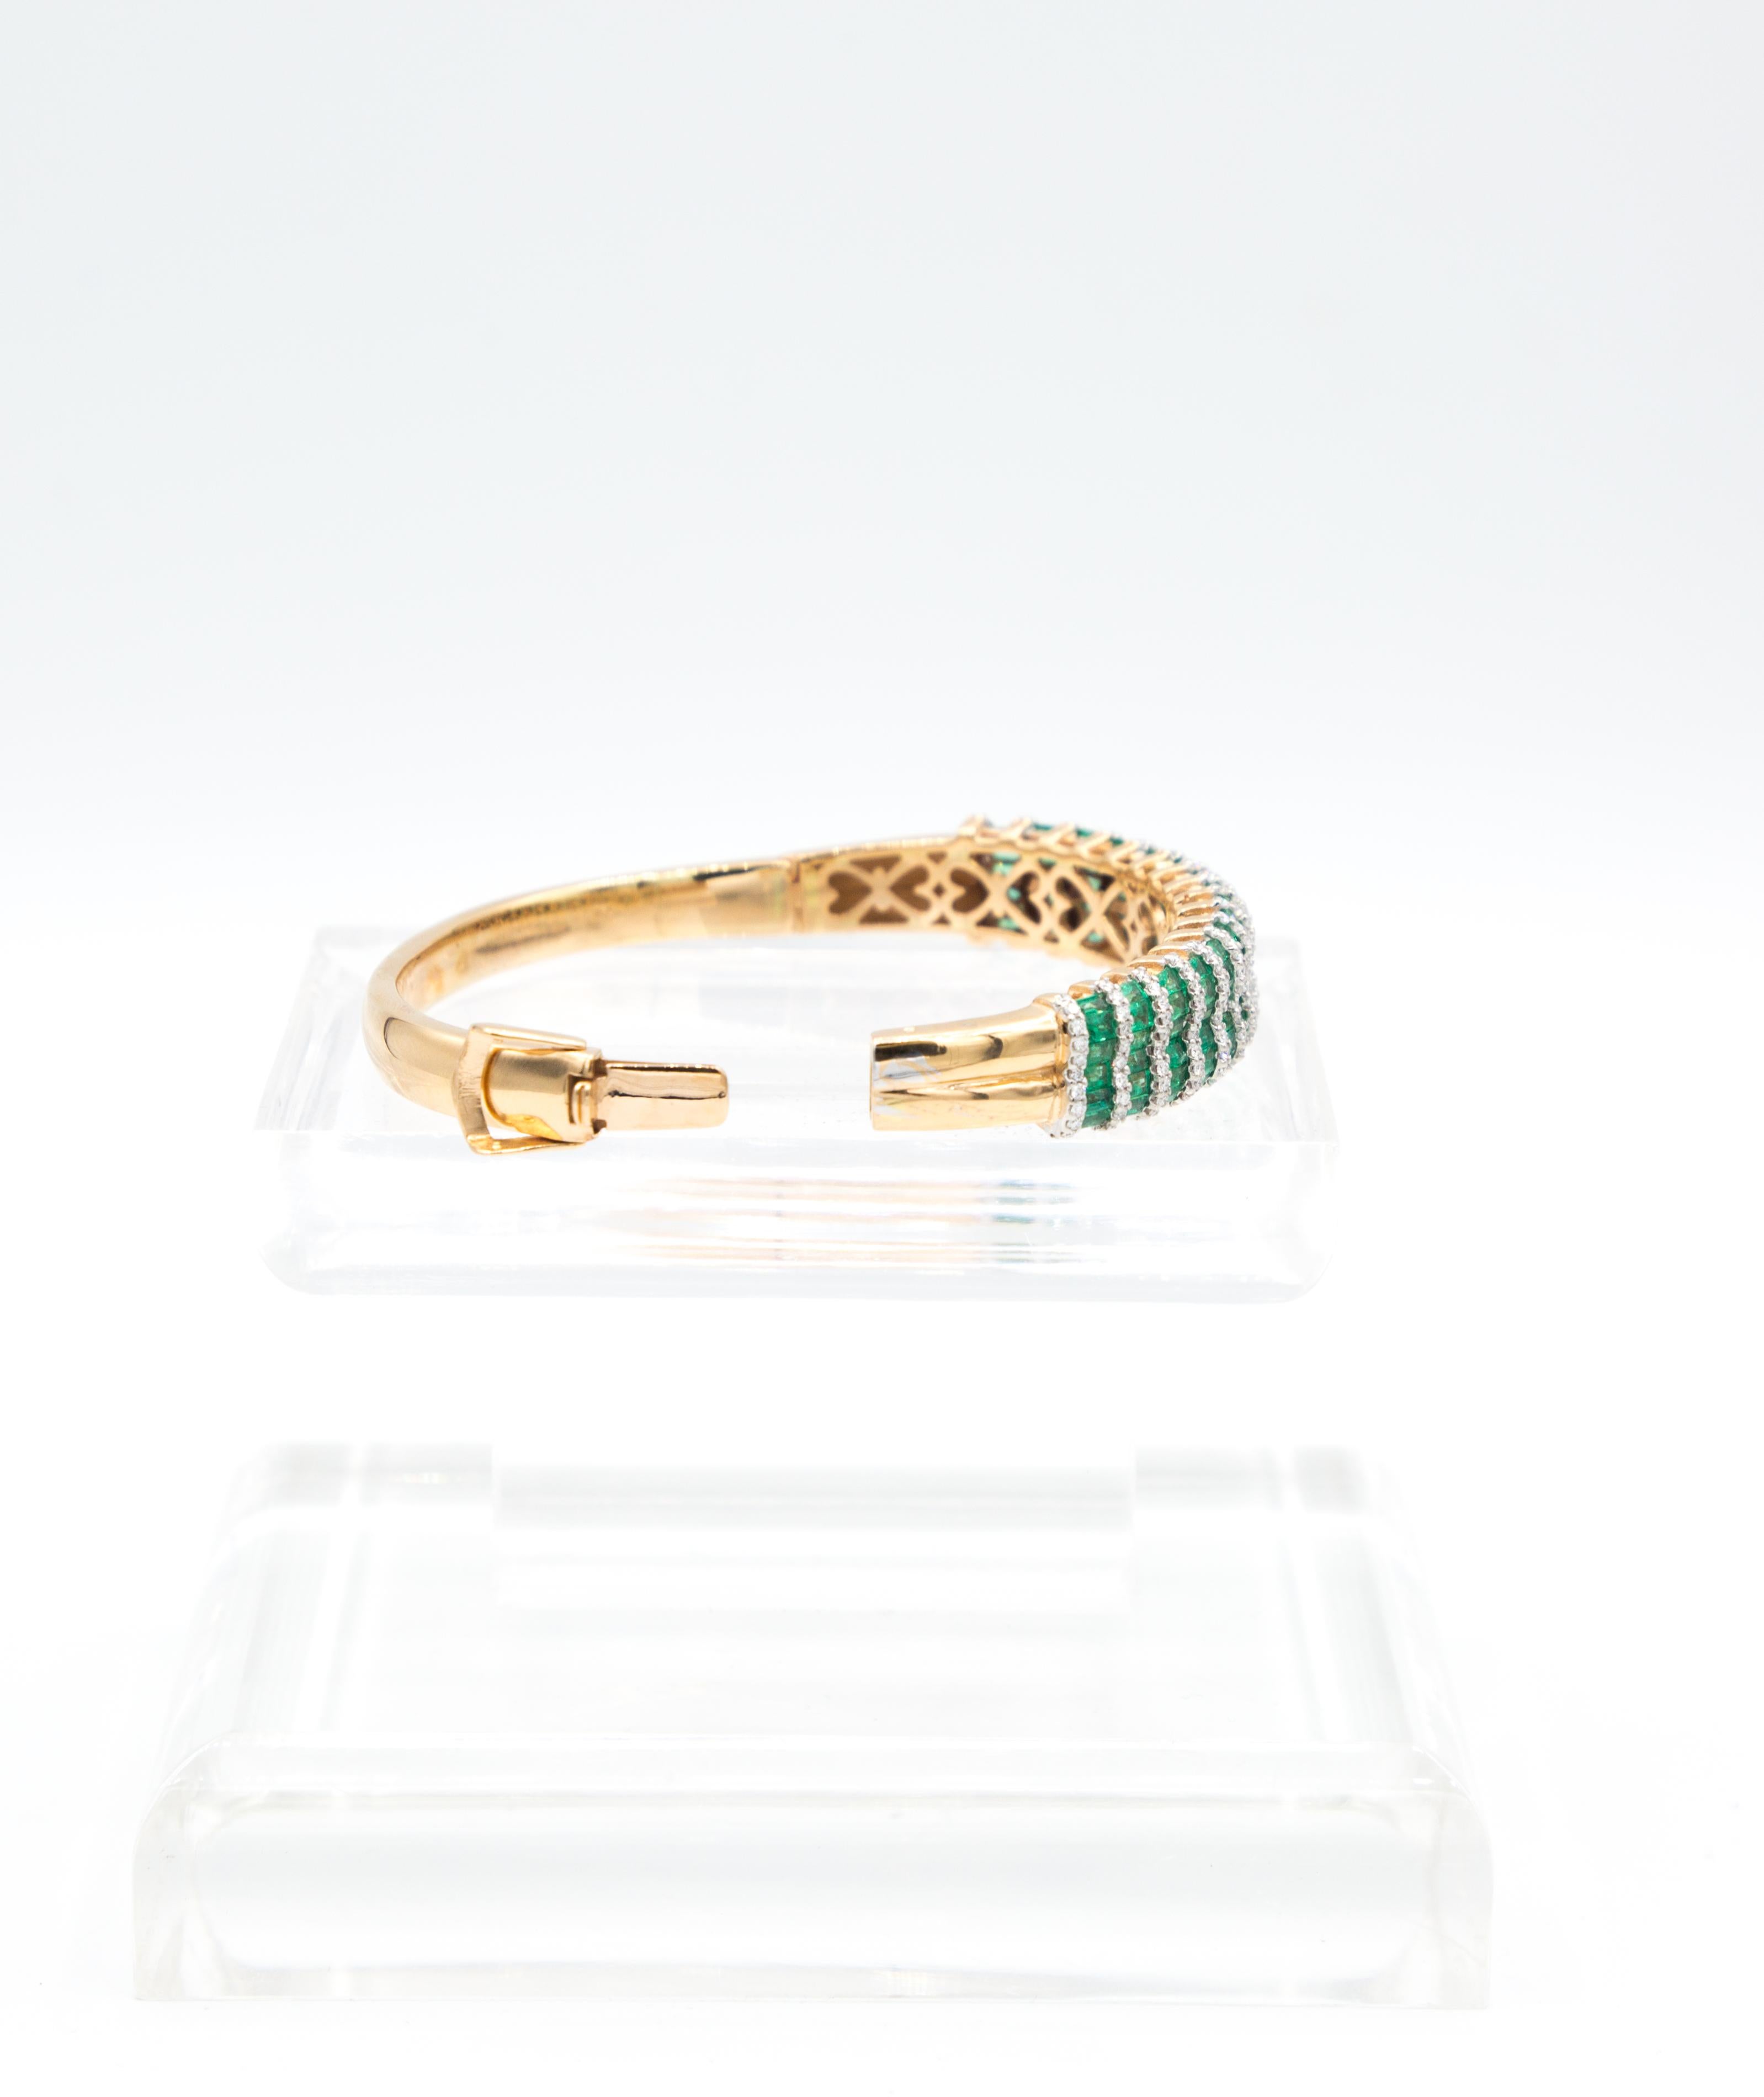 18 k yellow gold
5,85 ct emerald
1,30 ct diamond
inside wide 57 mm
inside height 50 mm

on the top 12 mm
under side 5 mm

36,13 gram

This bangle will dress you up
it is not easy to find a nice emerald bangle